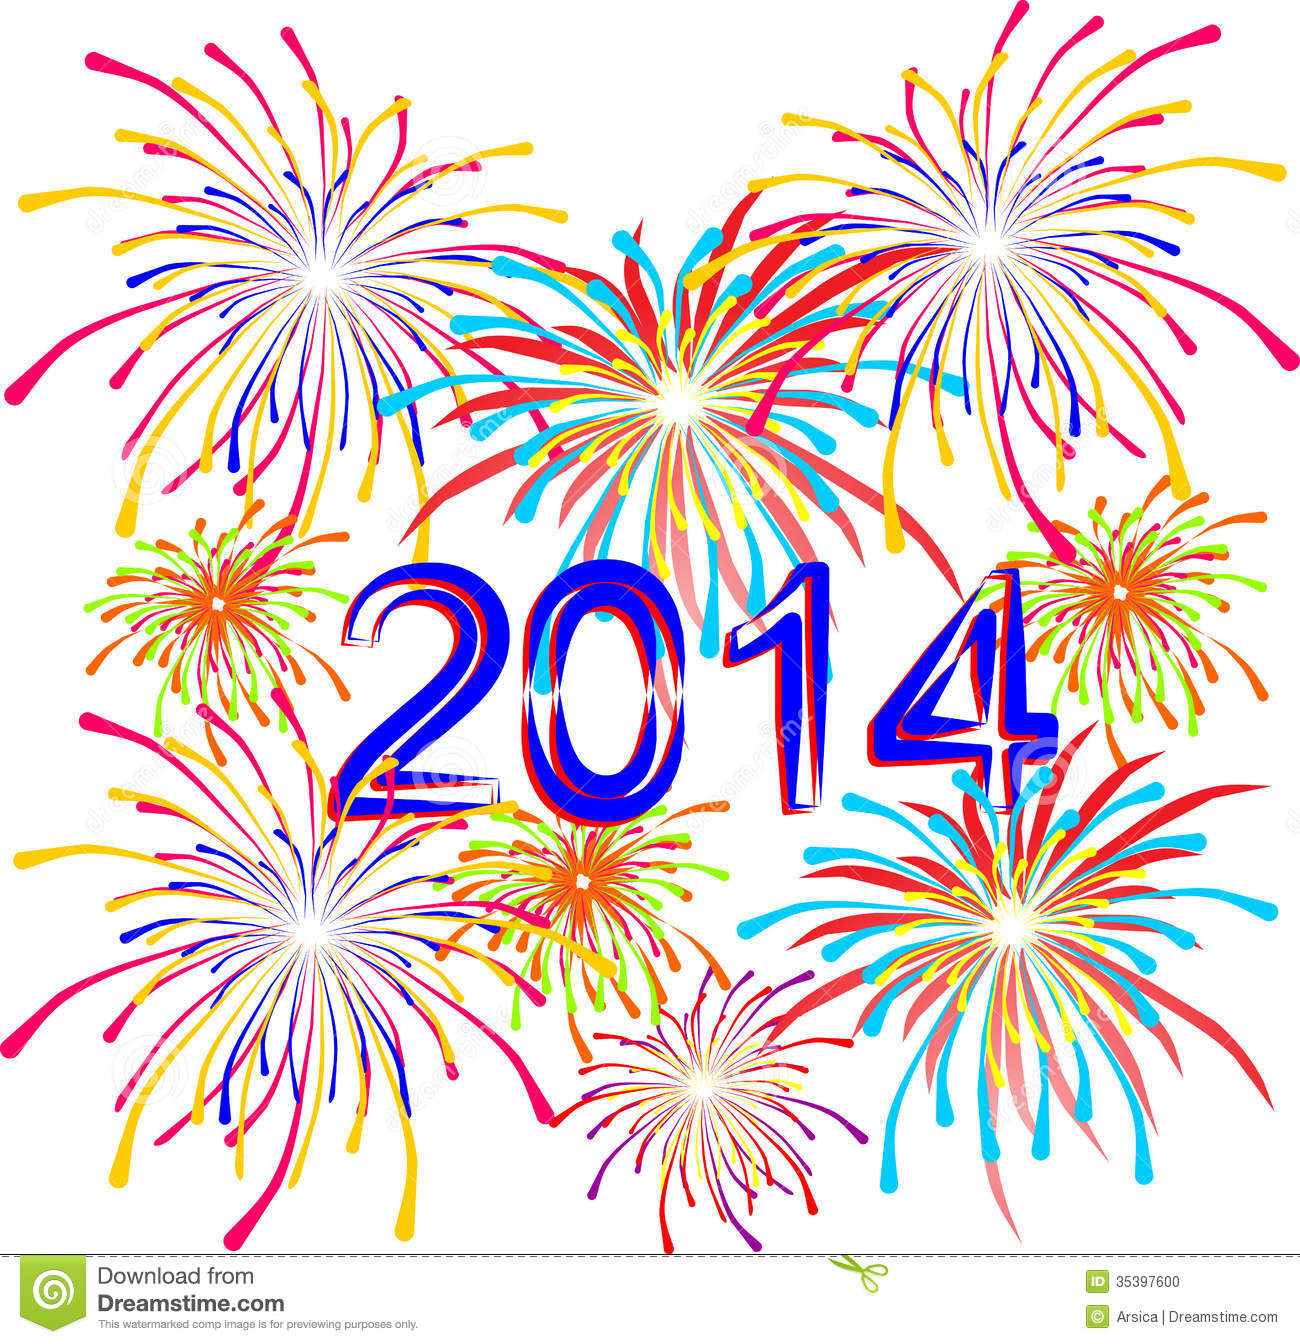 Fireworks For The Holiday On   Clipart Panda   Free Clipart Images